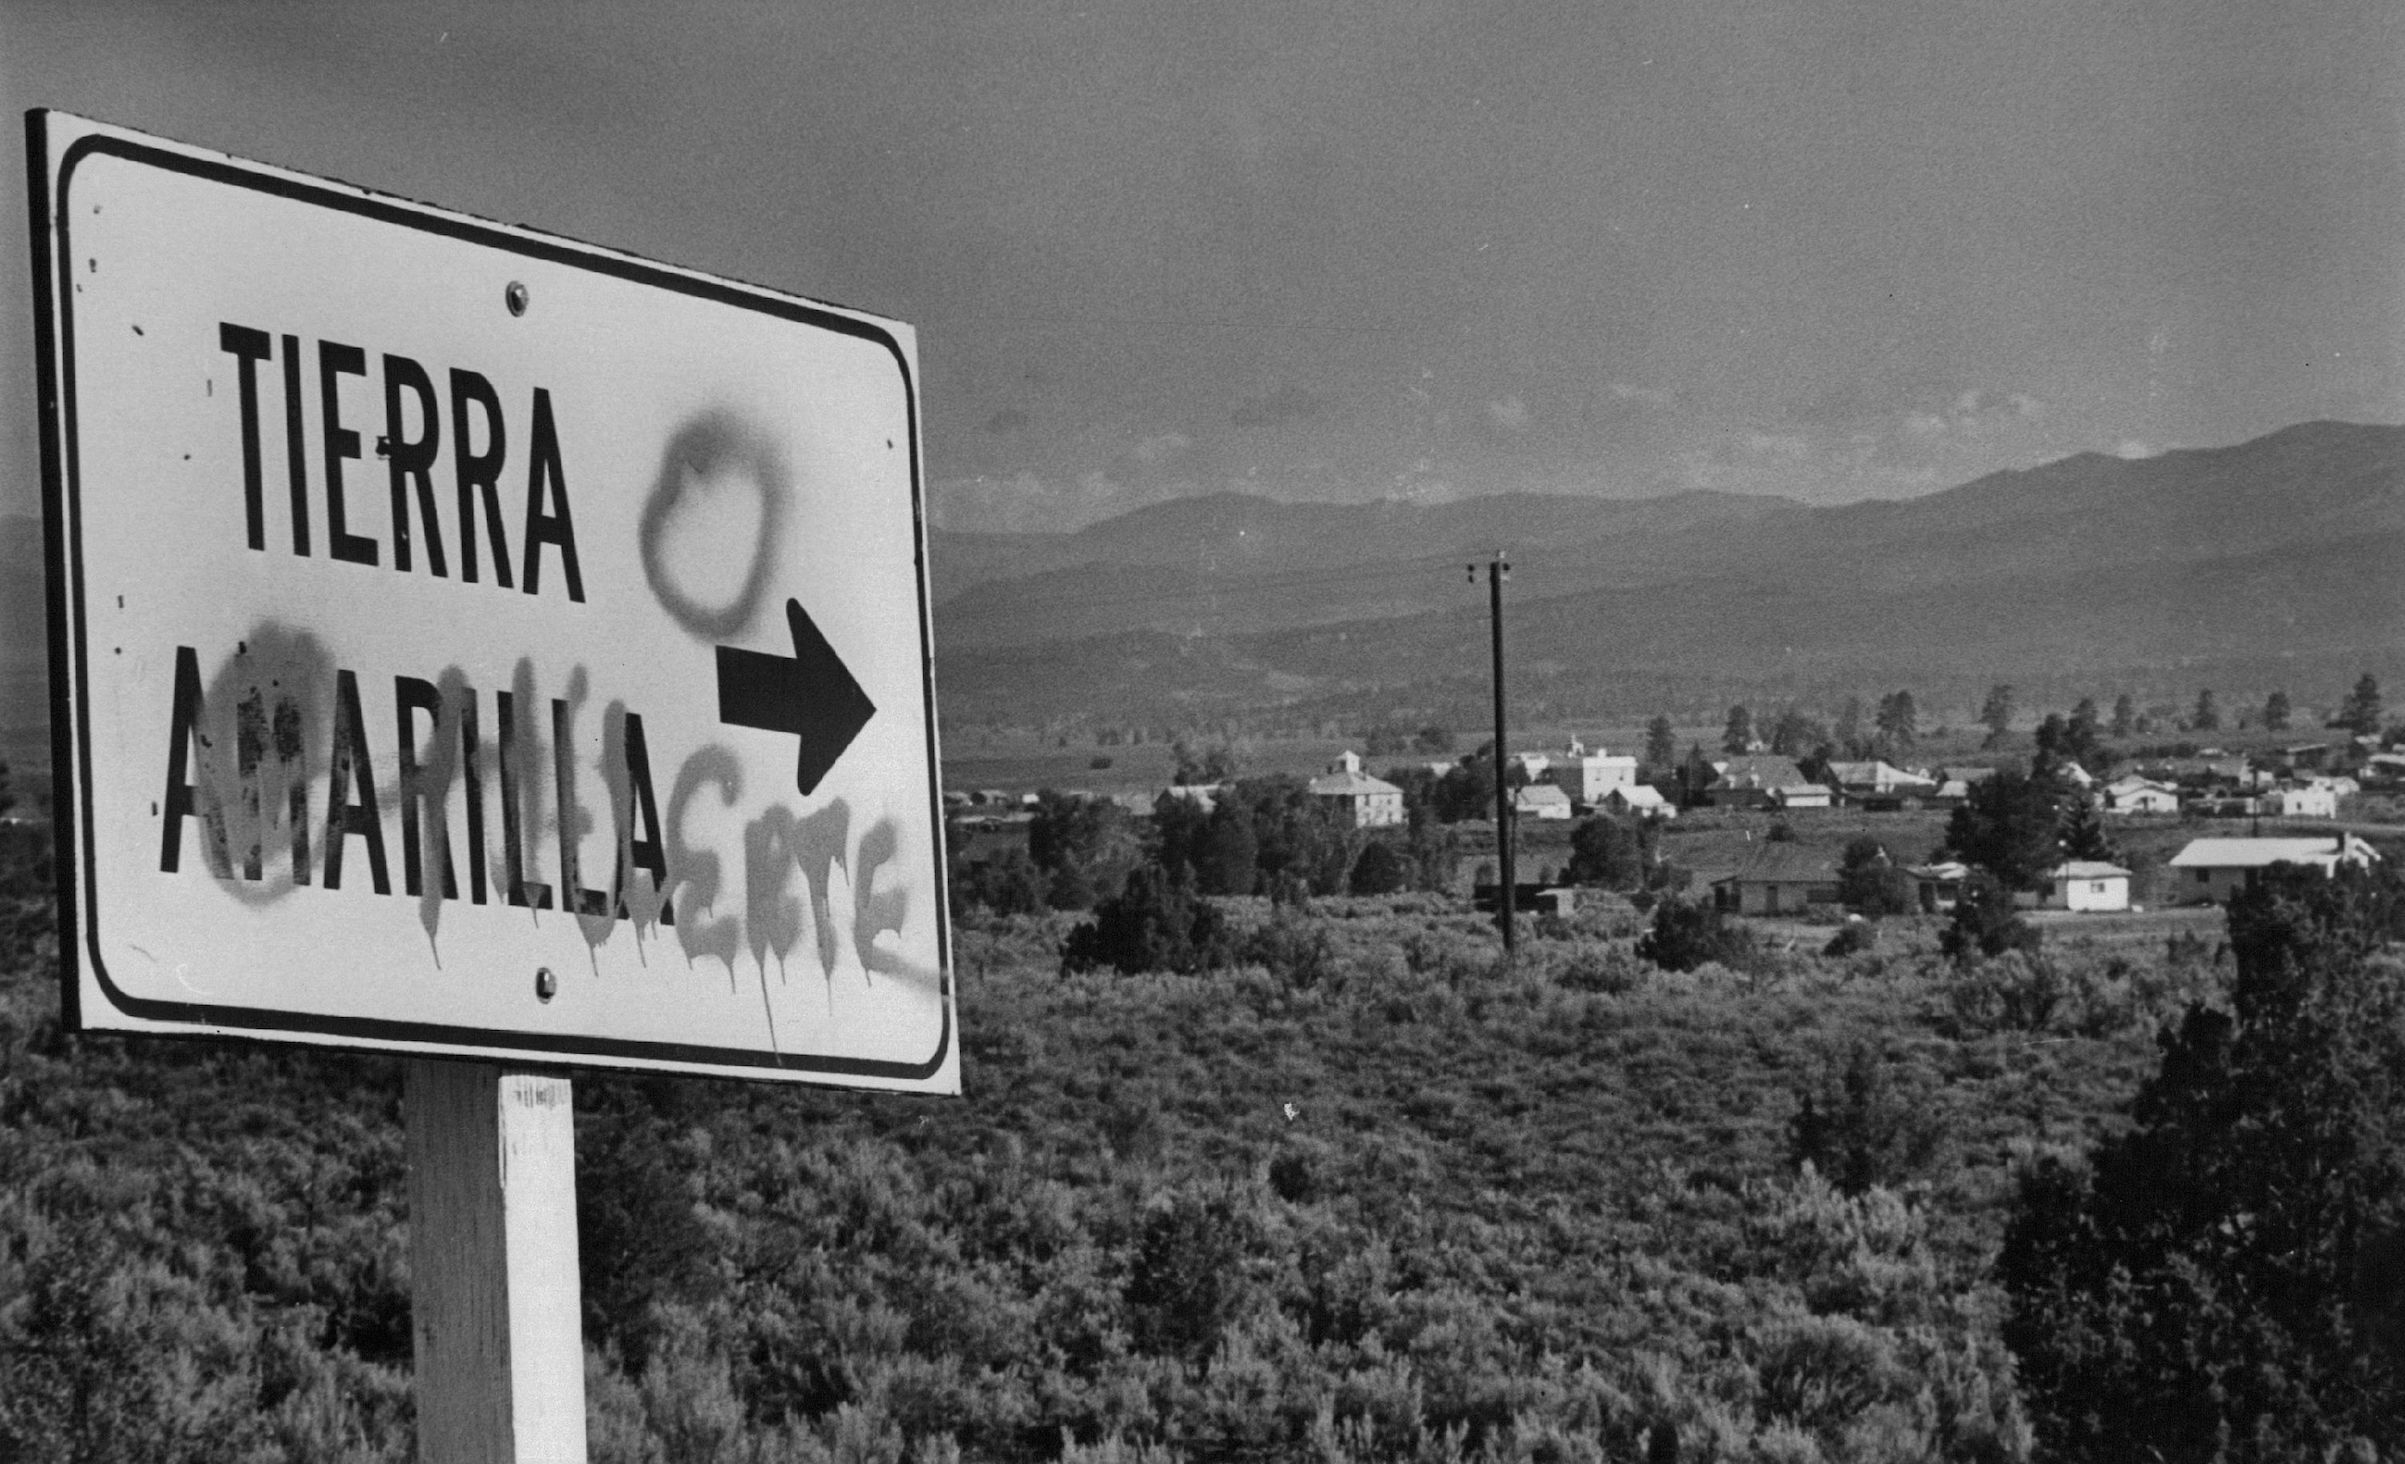 The road sign marking Tierra Amarilla, N.M., has been changed to read Tierra O Muerte, land or death, in the continuing land grant struggle. 1976. (Denver Post/Getty Images)